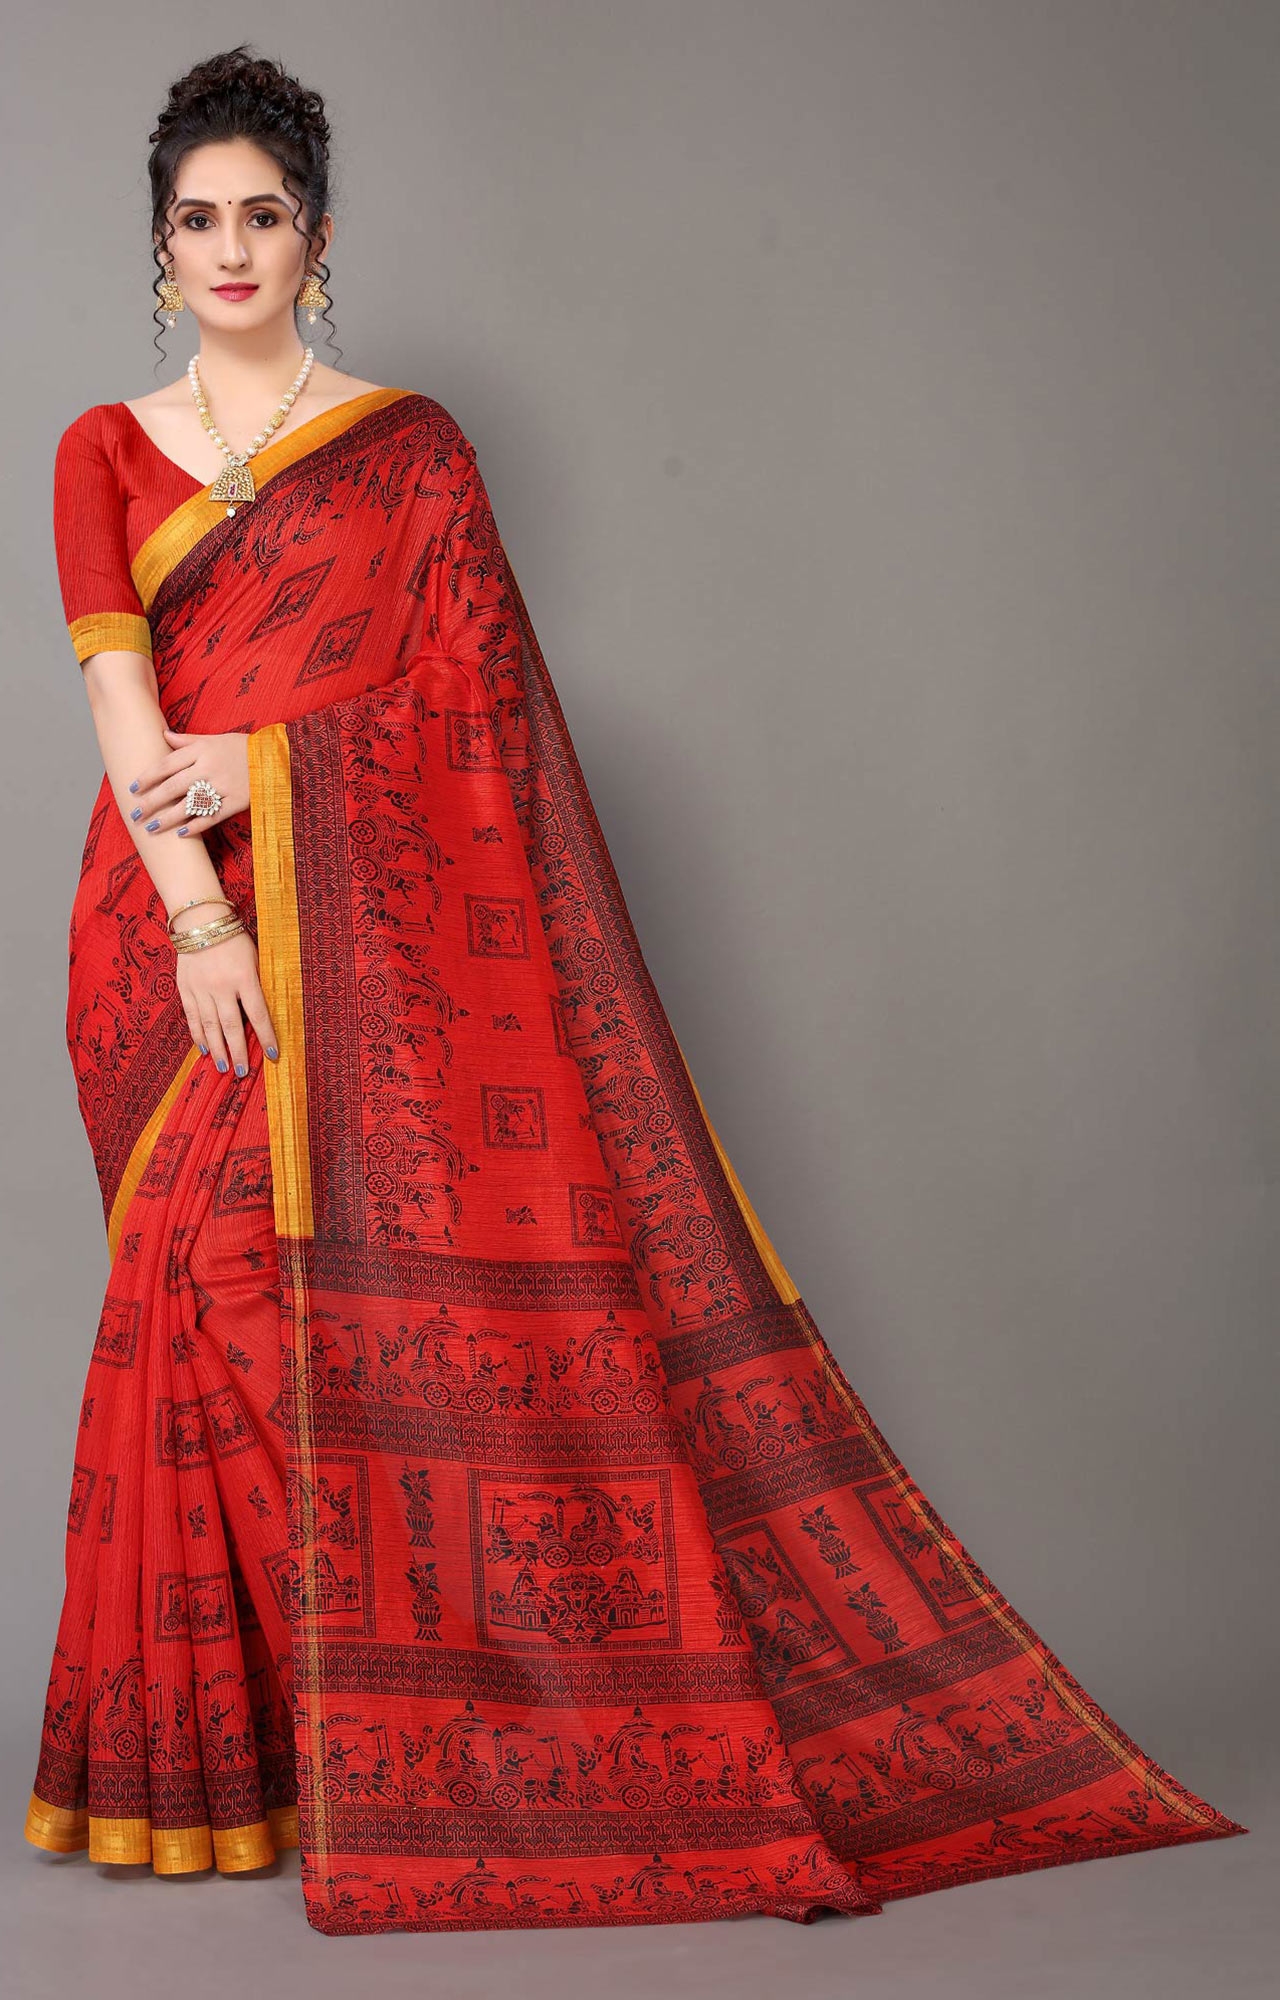 Women Daily Wear Red Traditional Printed Art Silk Saree - HAL29ART00113RED